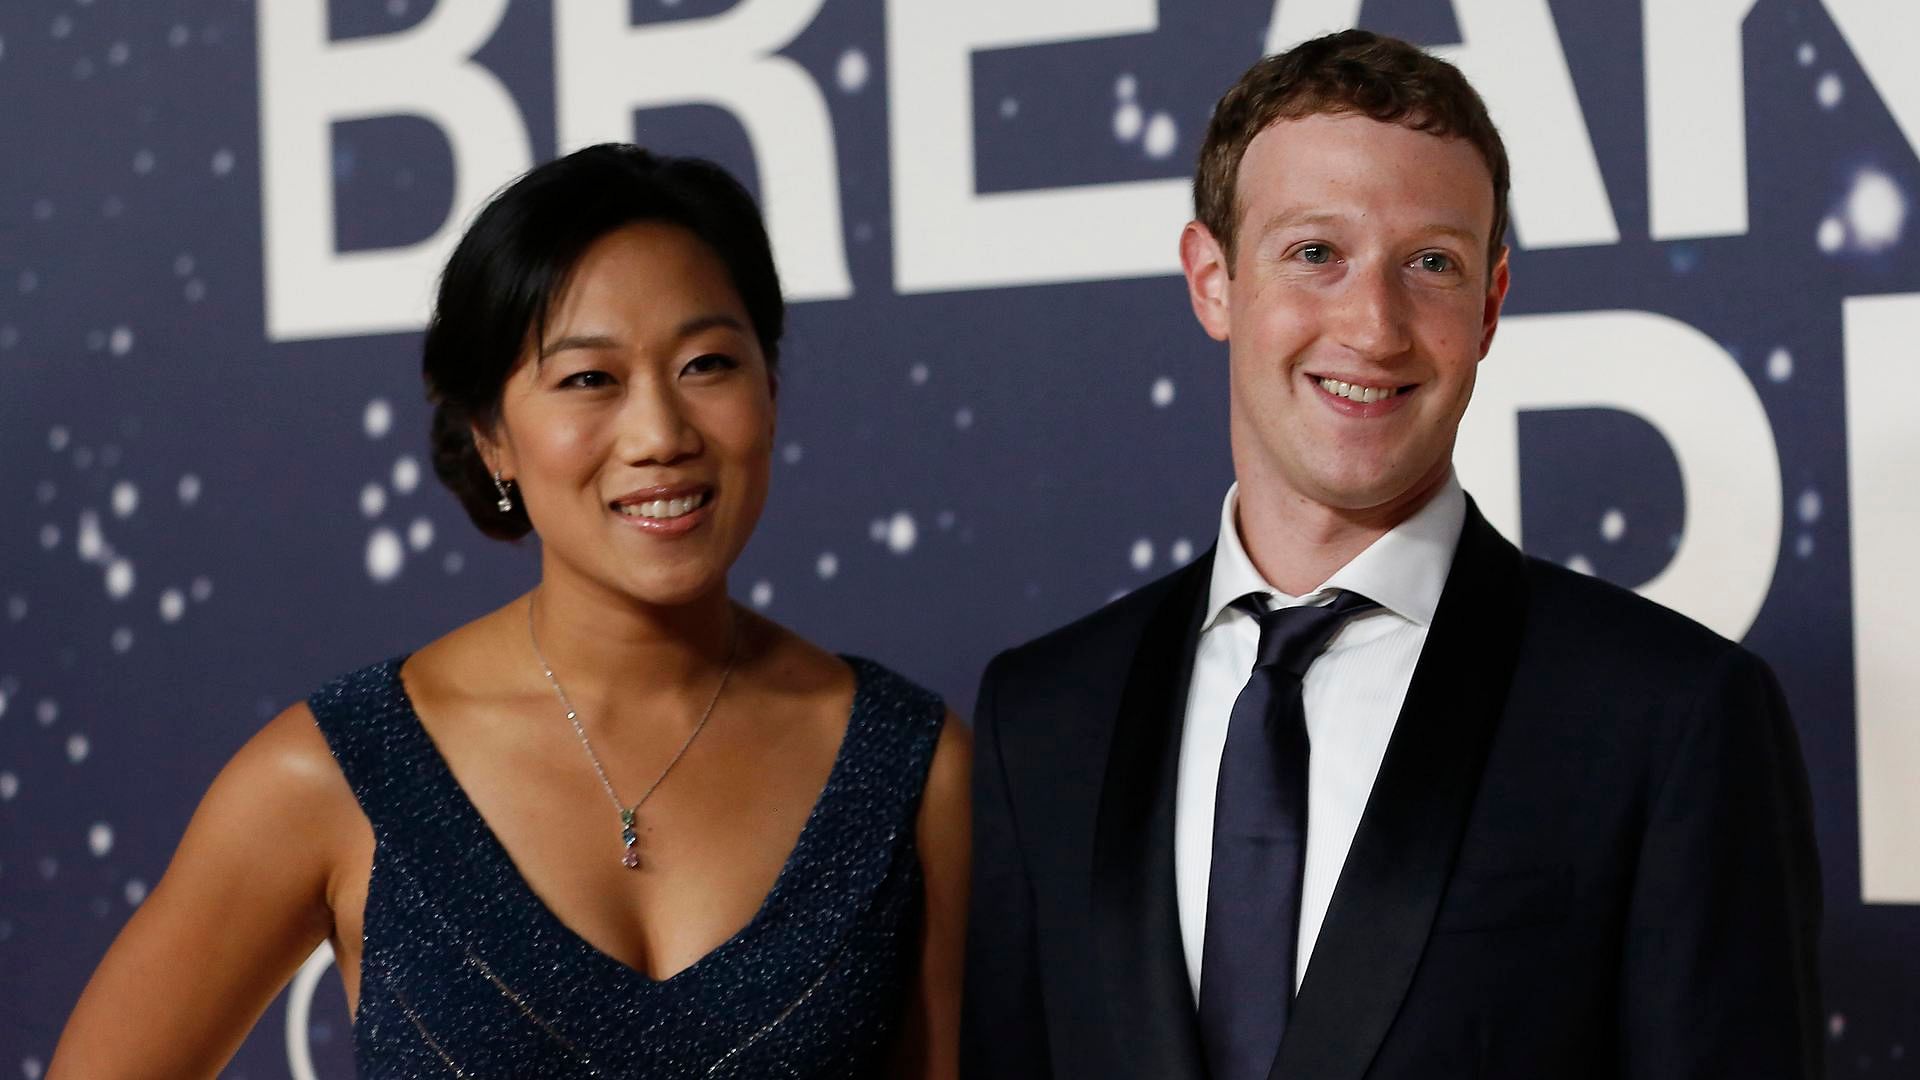 The Chan Zuckerberg Initiative, the philanthropic arm of Facebook founder Mark Zuckerberg and his wife Priscilla Chan, has announced plans to team up with the Bill and Melinda Gates Foundation to donate USD 25 million to a research fund exploring possible COVID-19 treatments.